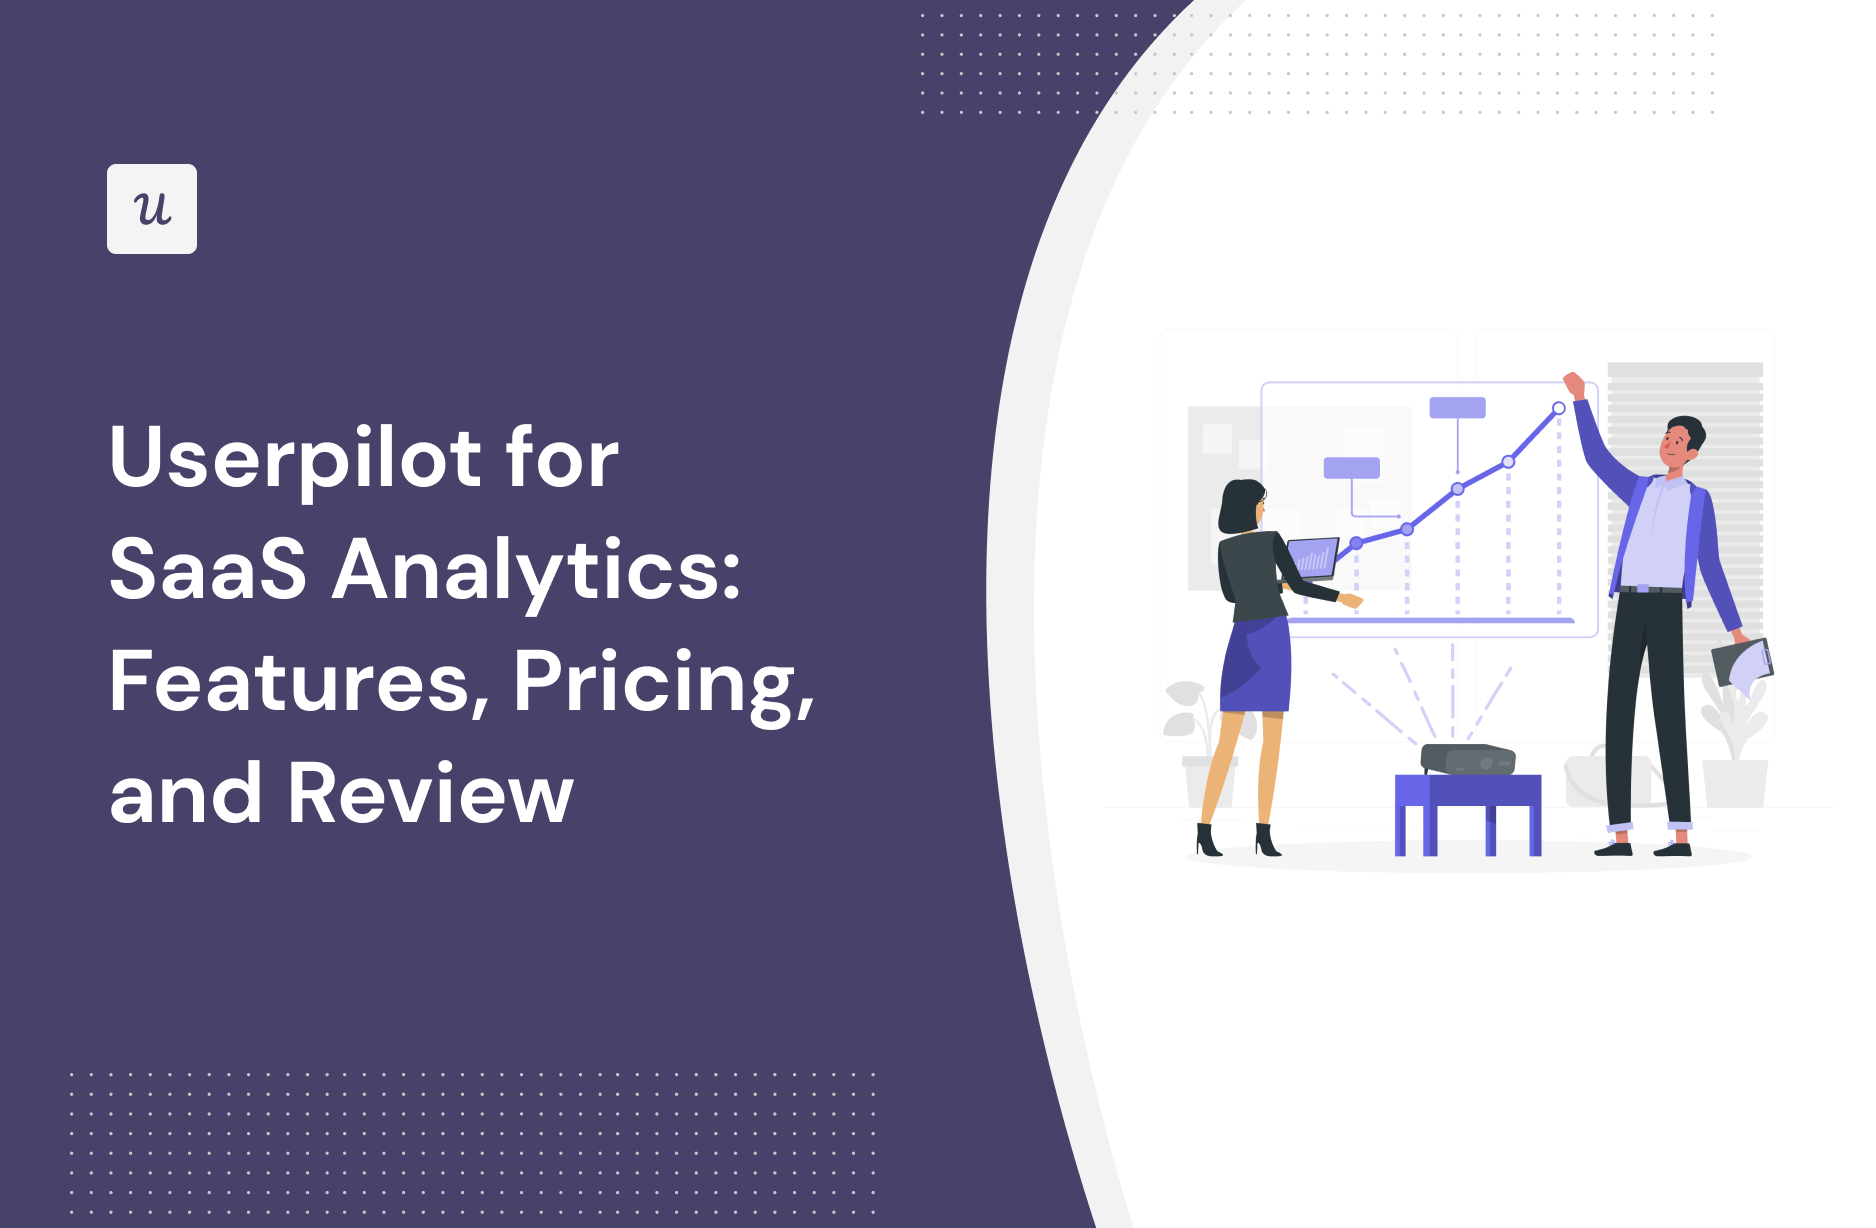 Userpilot for SaaS Analytics: Features, Pricing, and Review